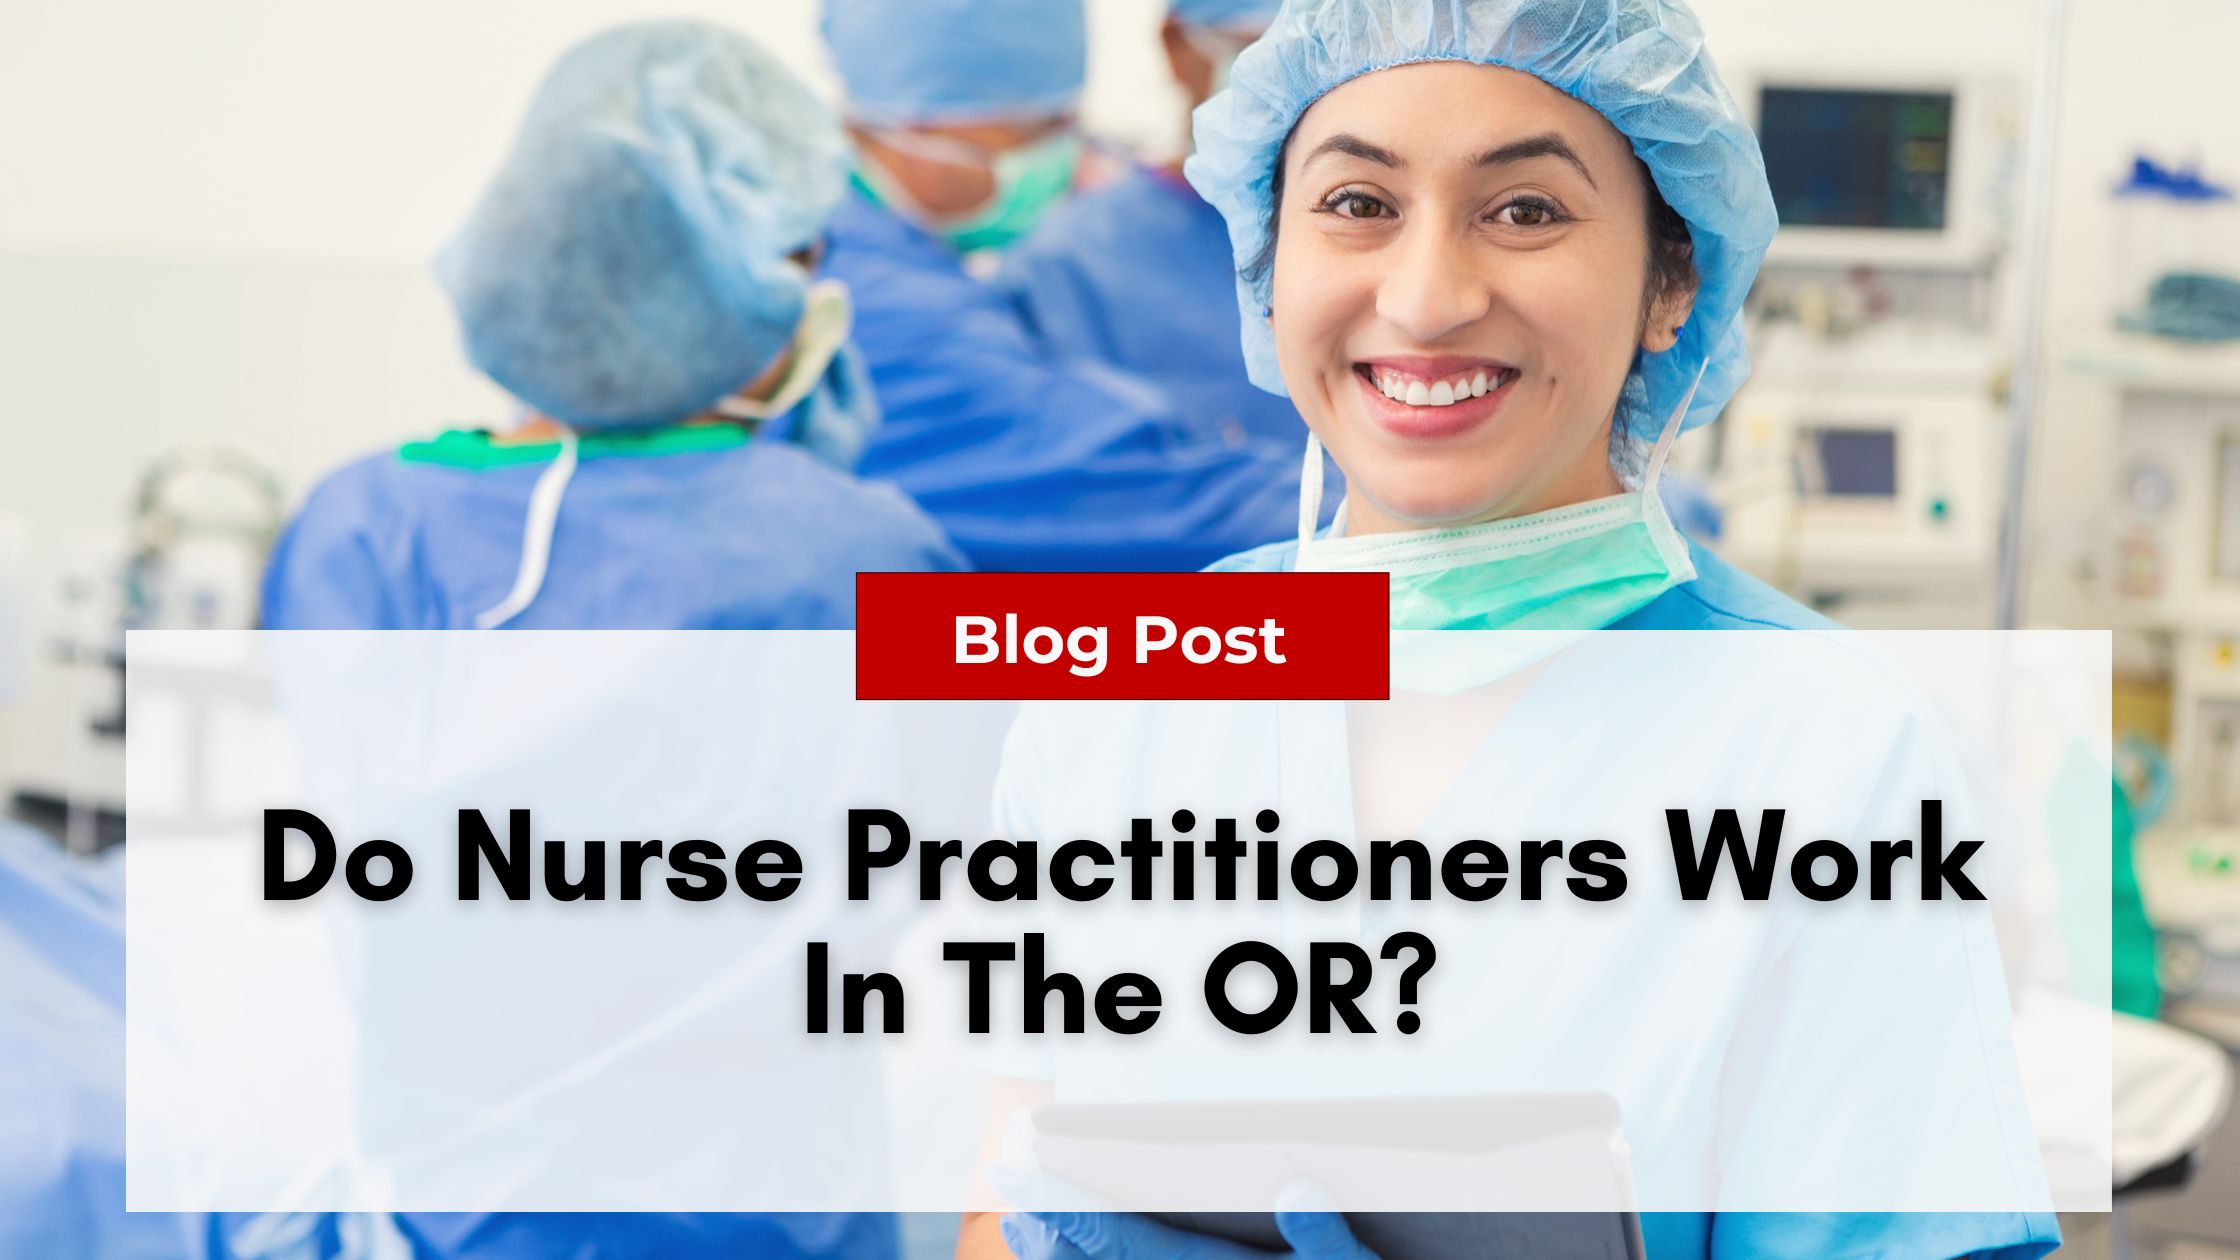 A nurse practitioner in blue scrubs and cap smiles in an operating room, with the text "Do Nurse Practitioners Work In The OR?" overlayed in the front. Addressing Nurse Practitioner Burnout is crucial for those dedicated to surgical care.